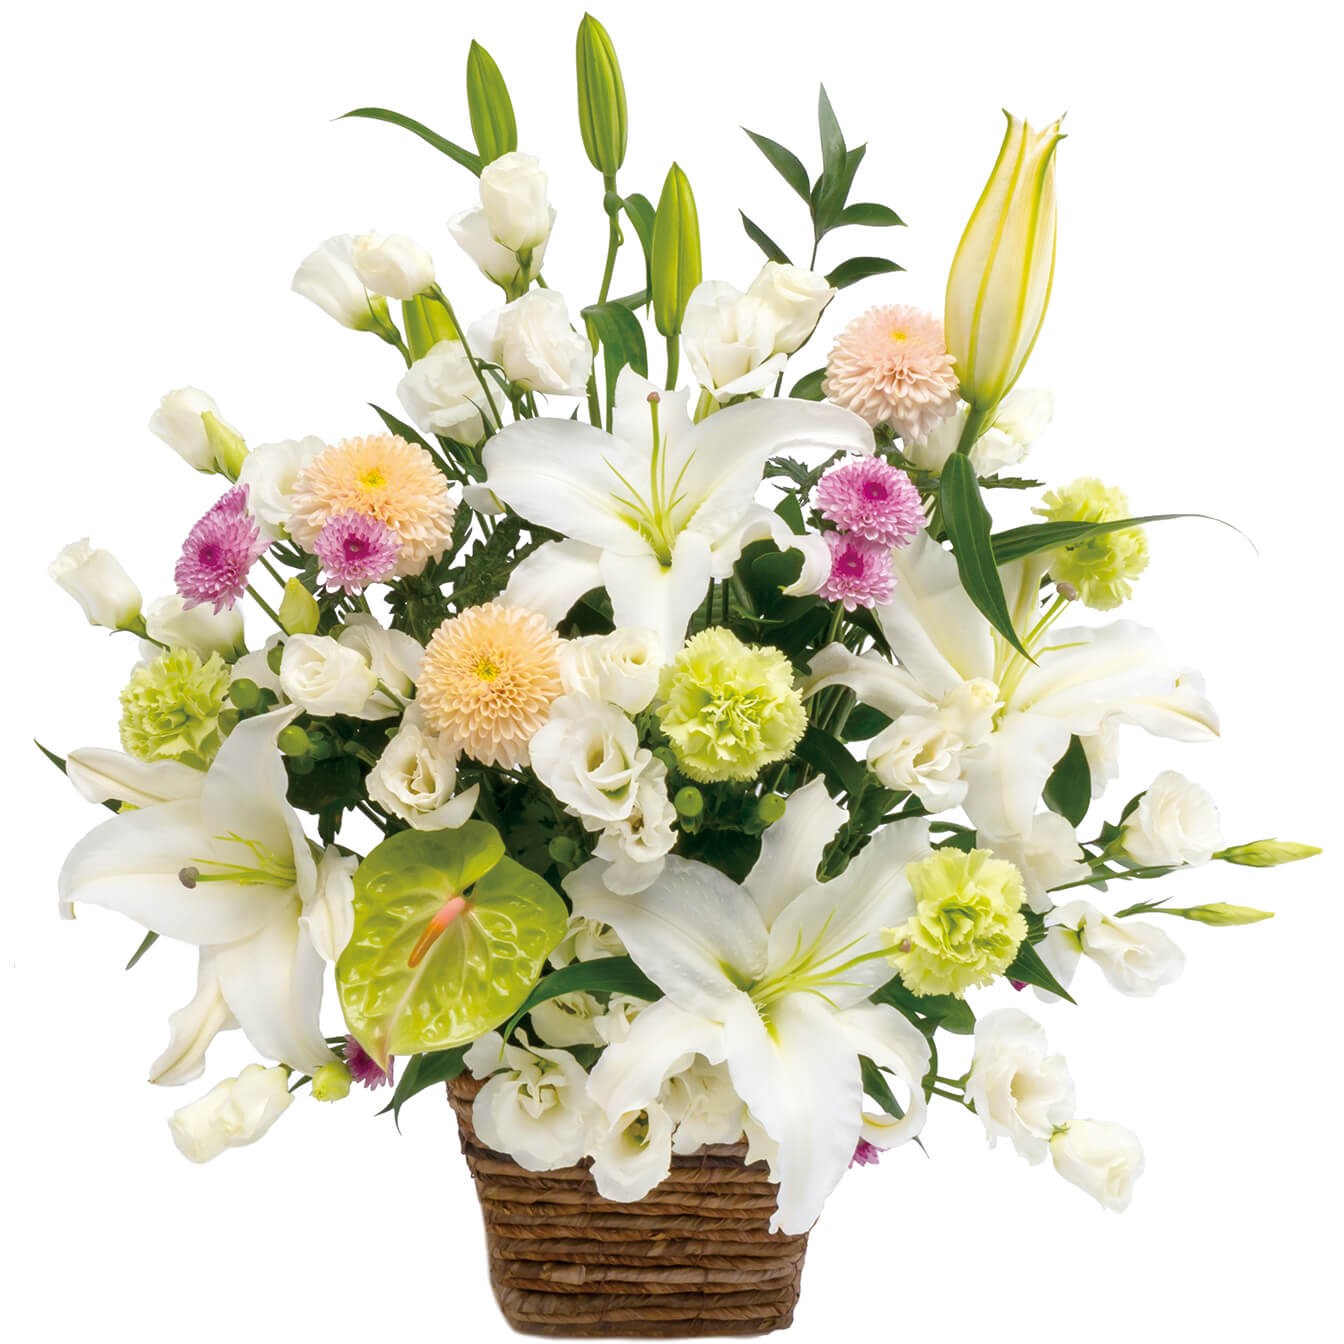 Large sympathy arrangement in white with some pastel colors